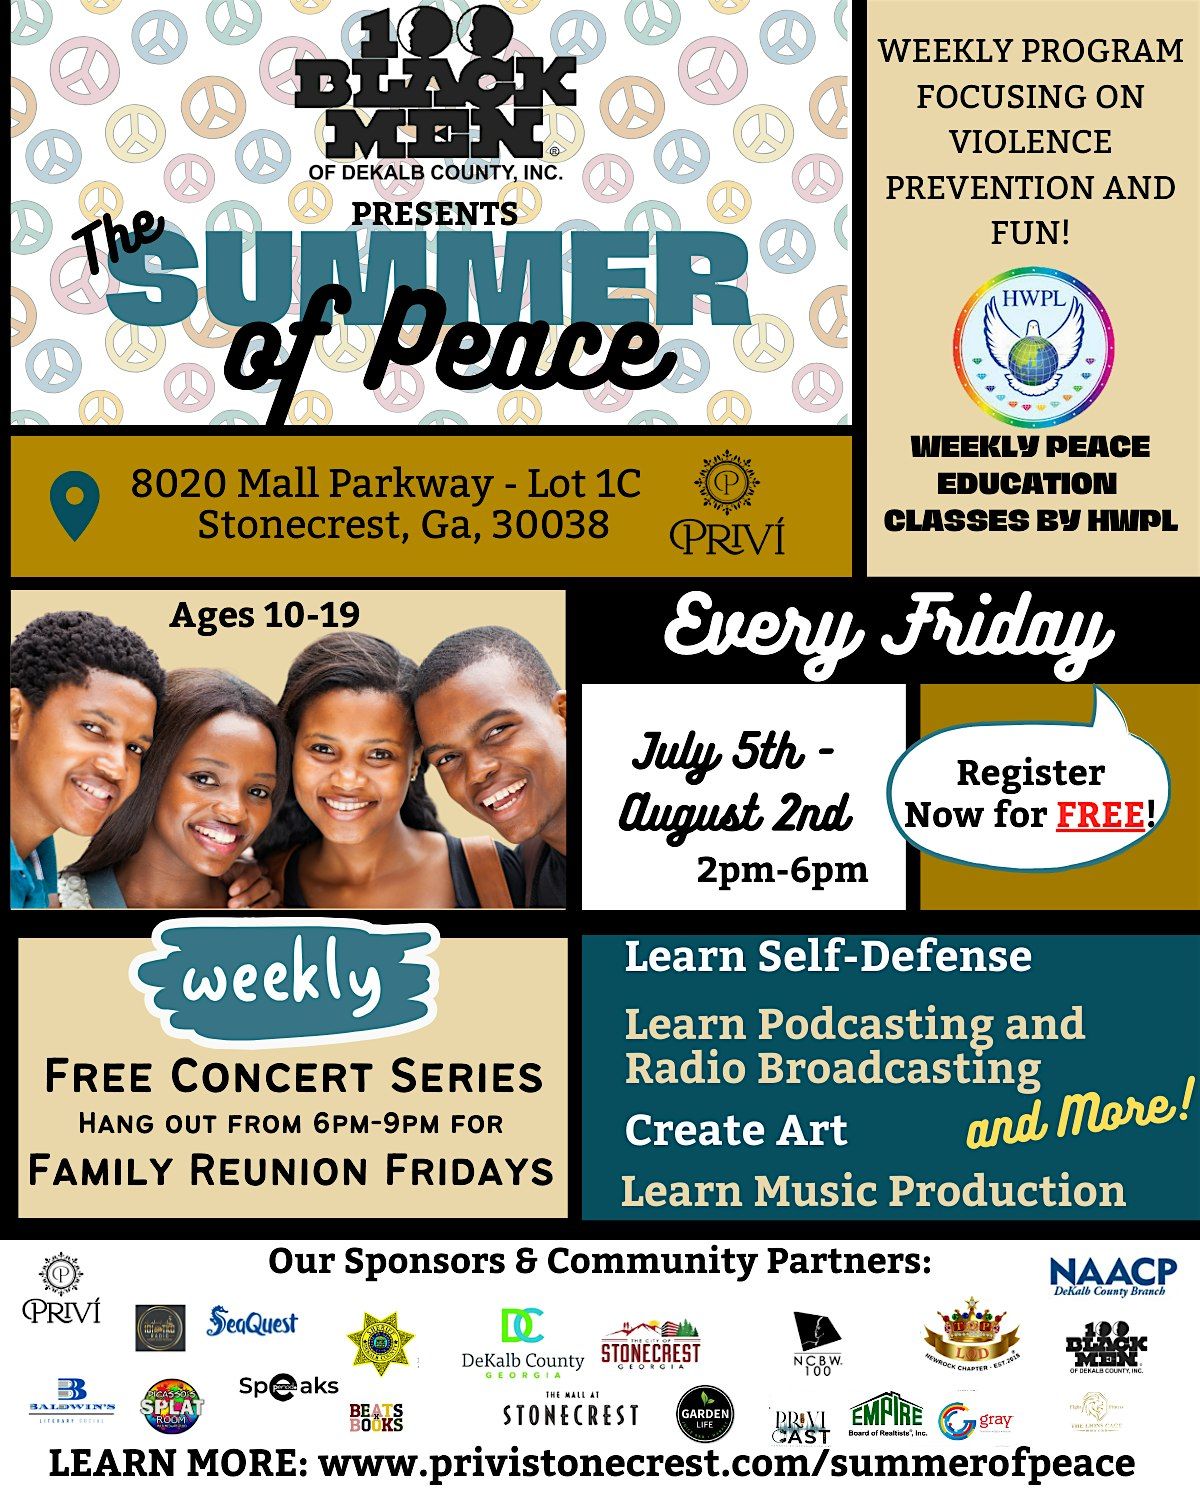 The Summer of Peace Youth Program